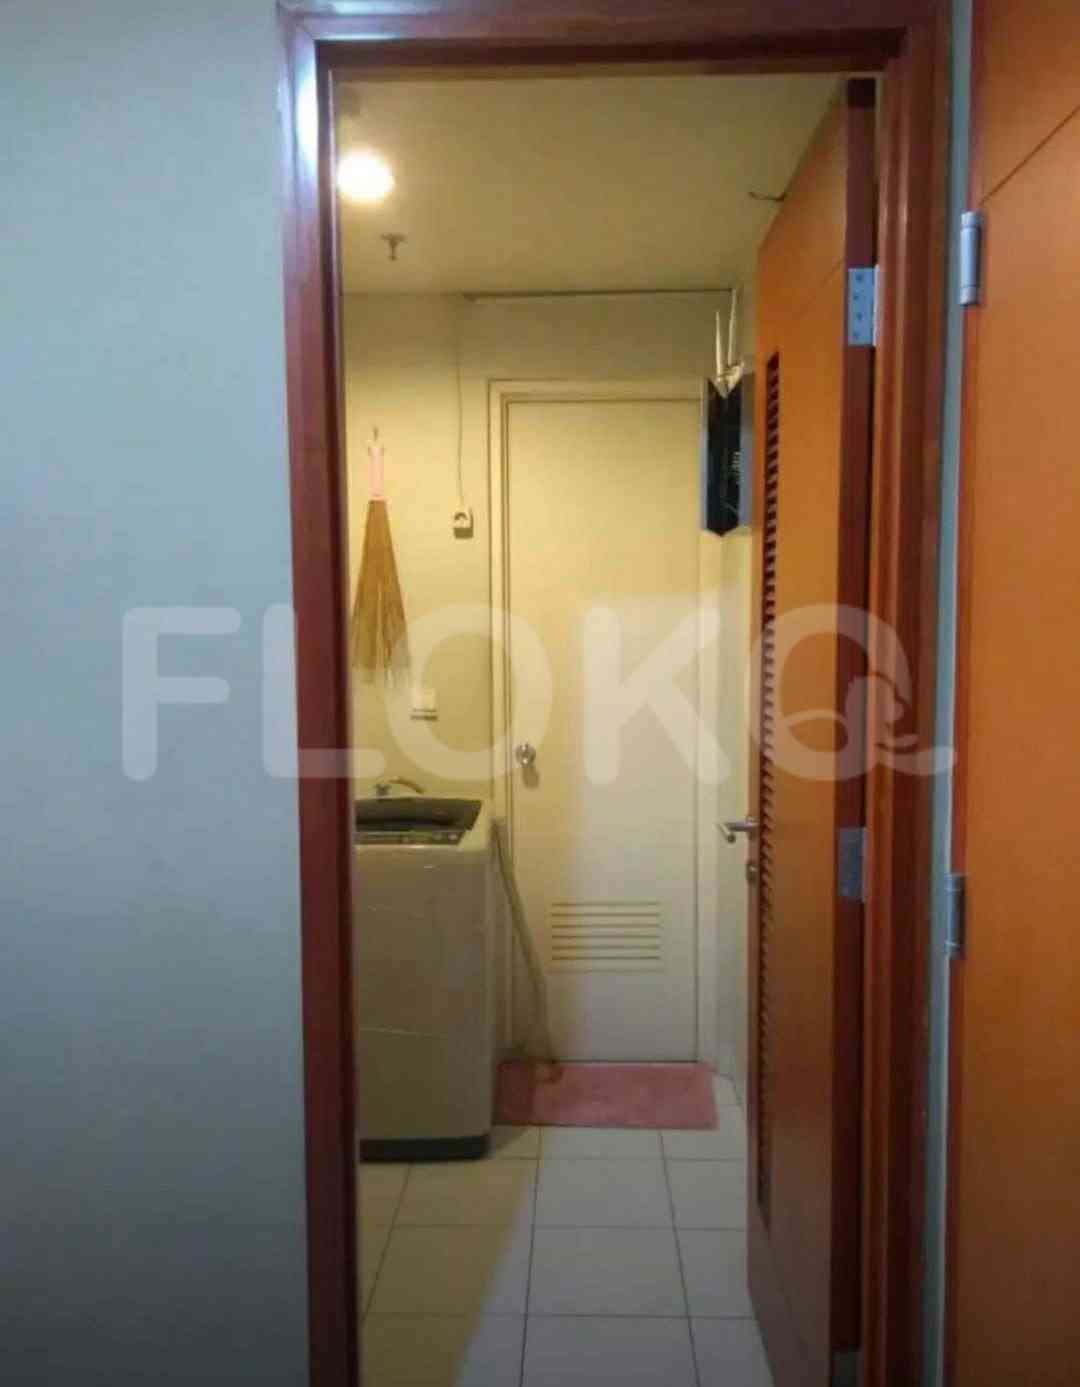 2 Bedroom on 15th Floor for Rent in Kuningan Place Apartment - fku817 2